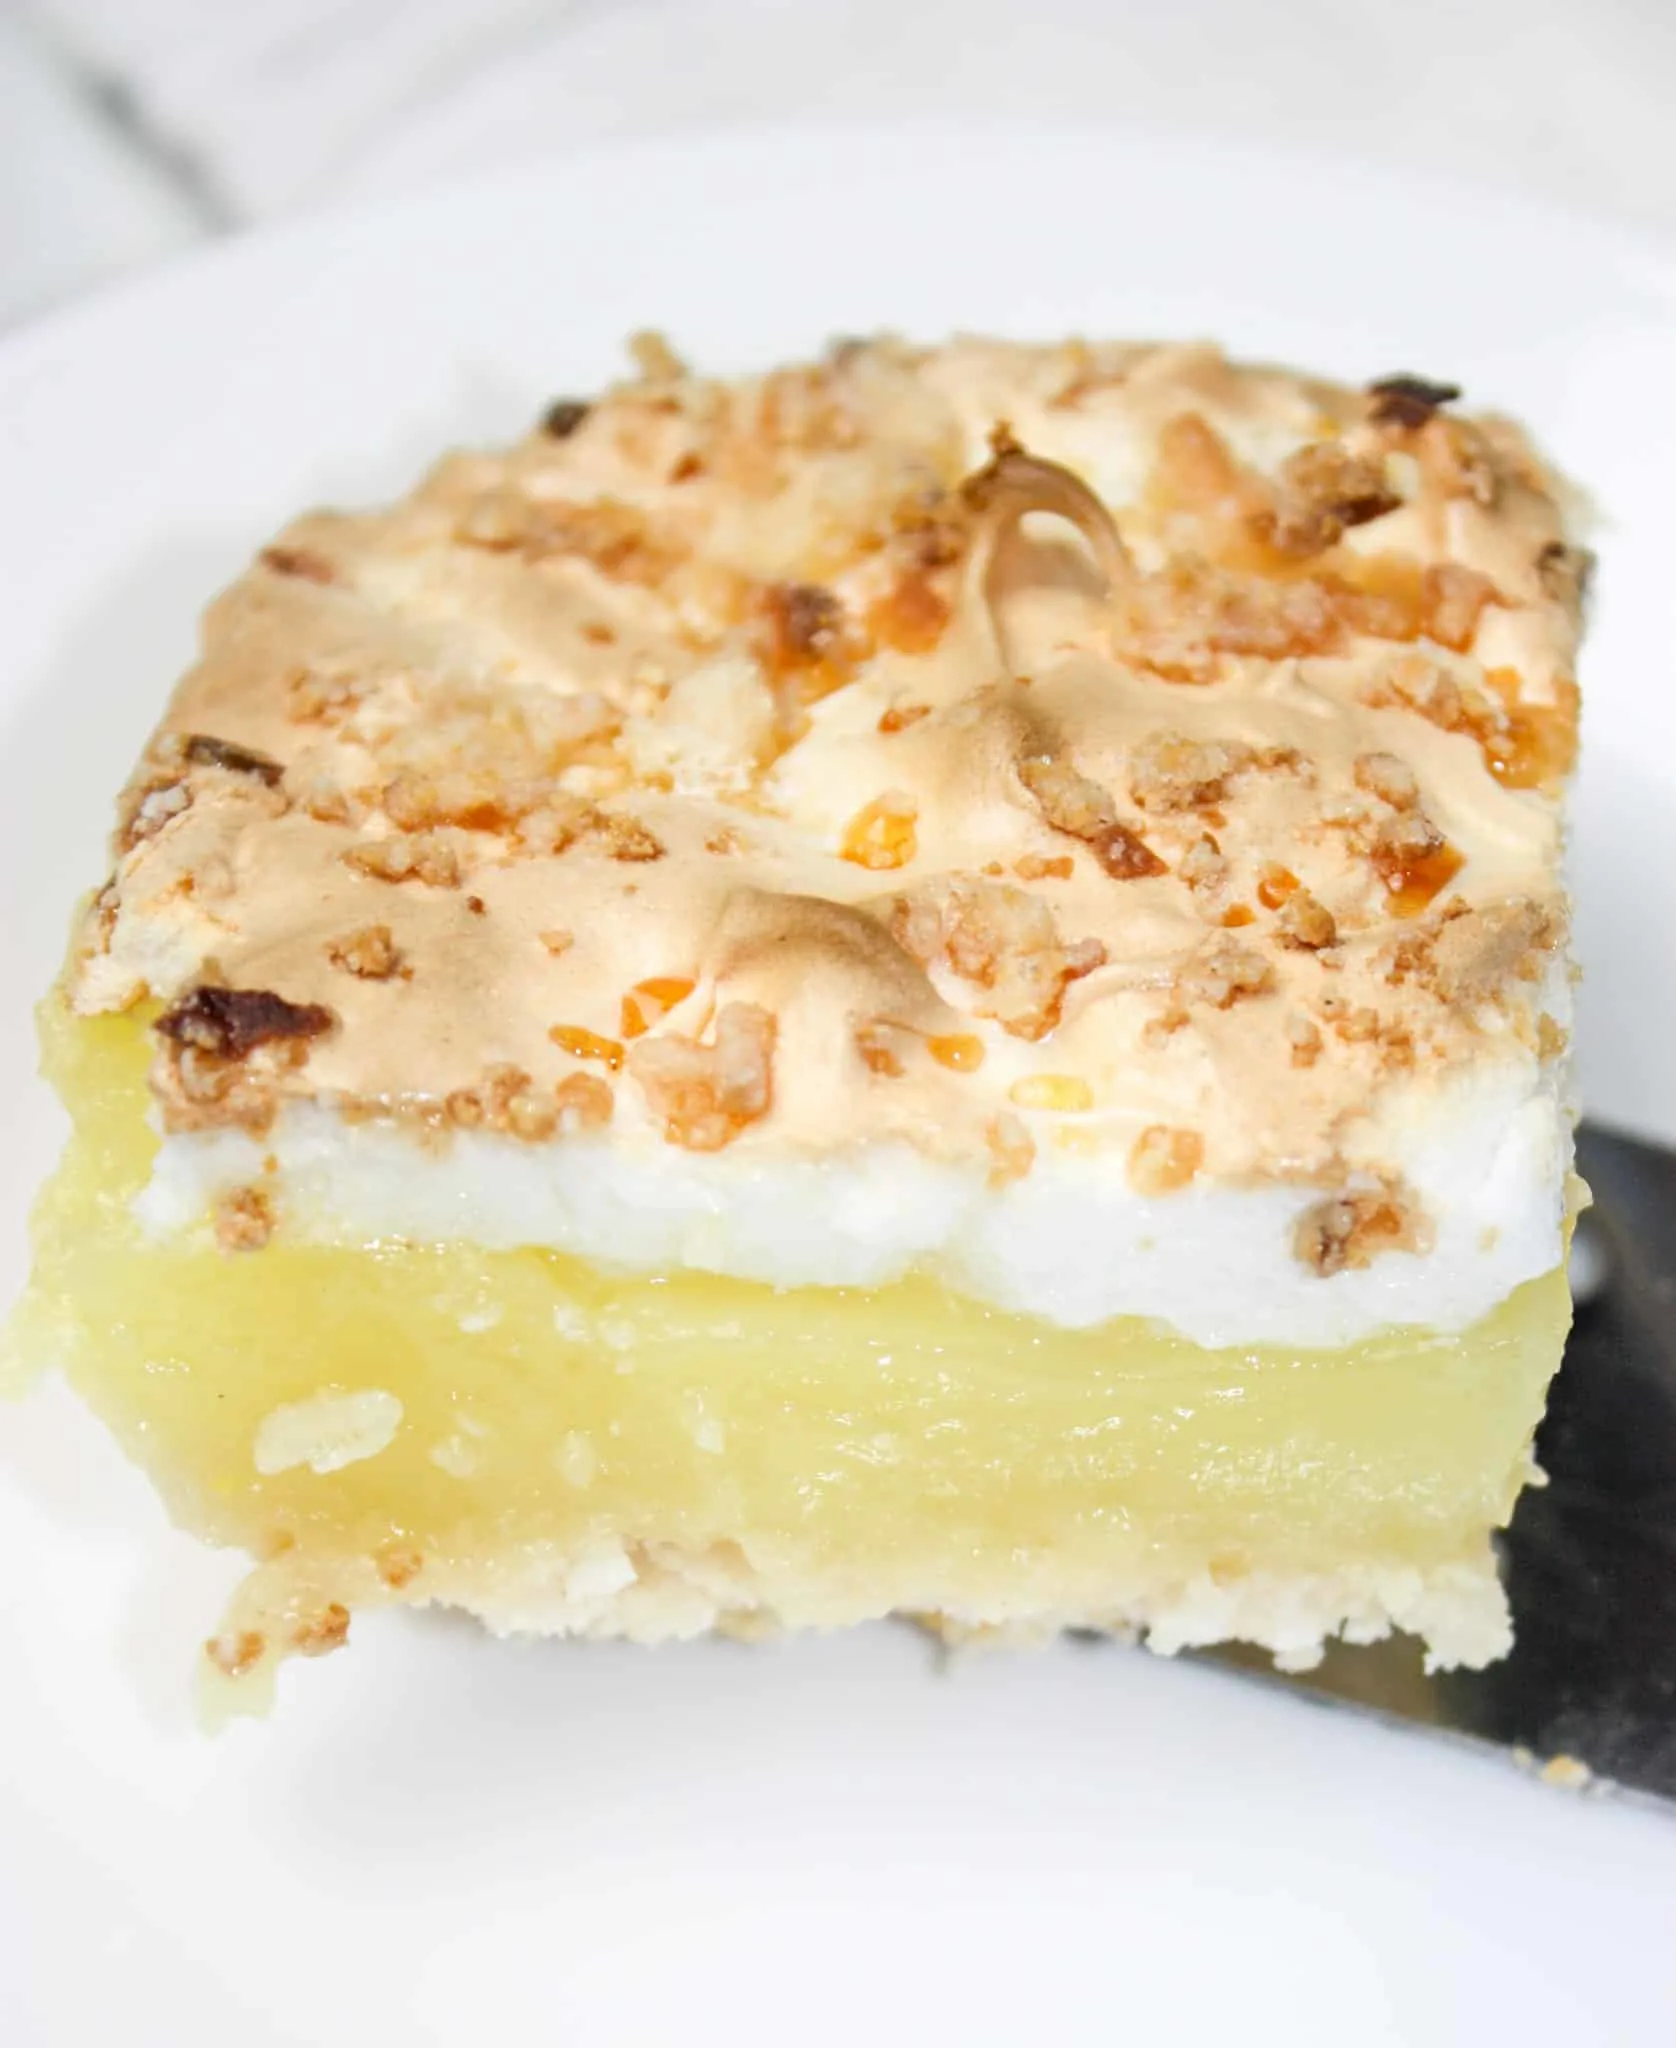 Lemon Pie Squares are a light citrus dessert that make a great ending to any meal.  This easy dessert is a tasty treat that really hits the spot in the spring and summer weather.